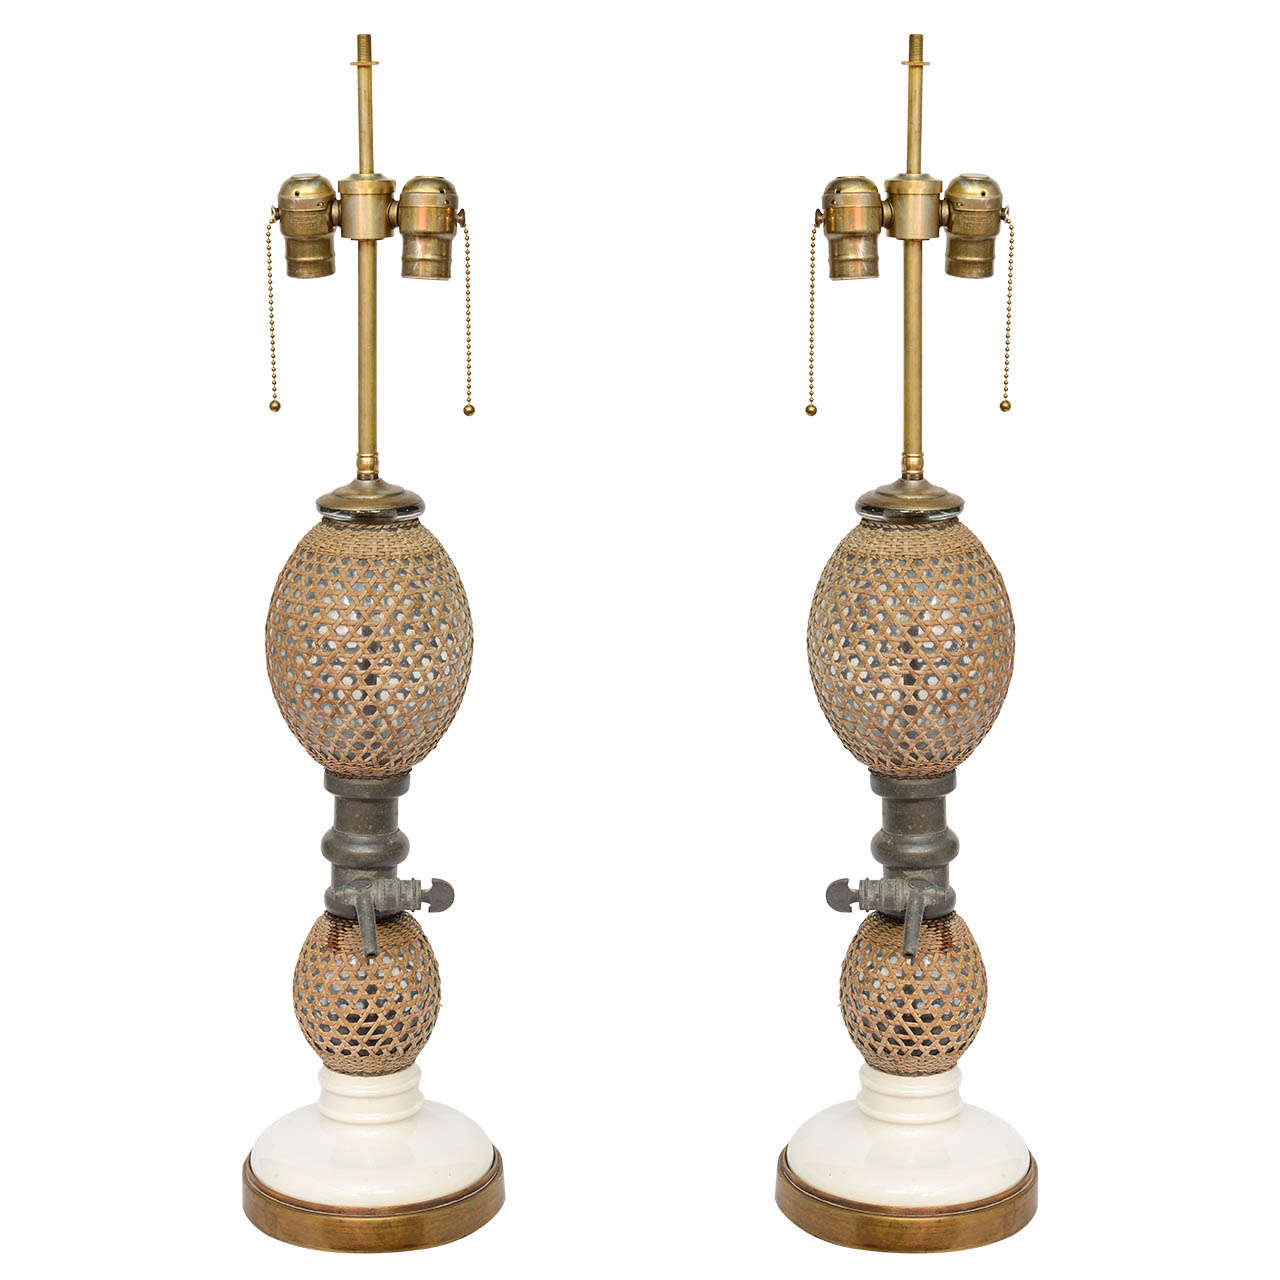 Authentic Pair Seltzer Bottle Table Lamps from France